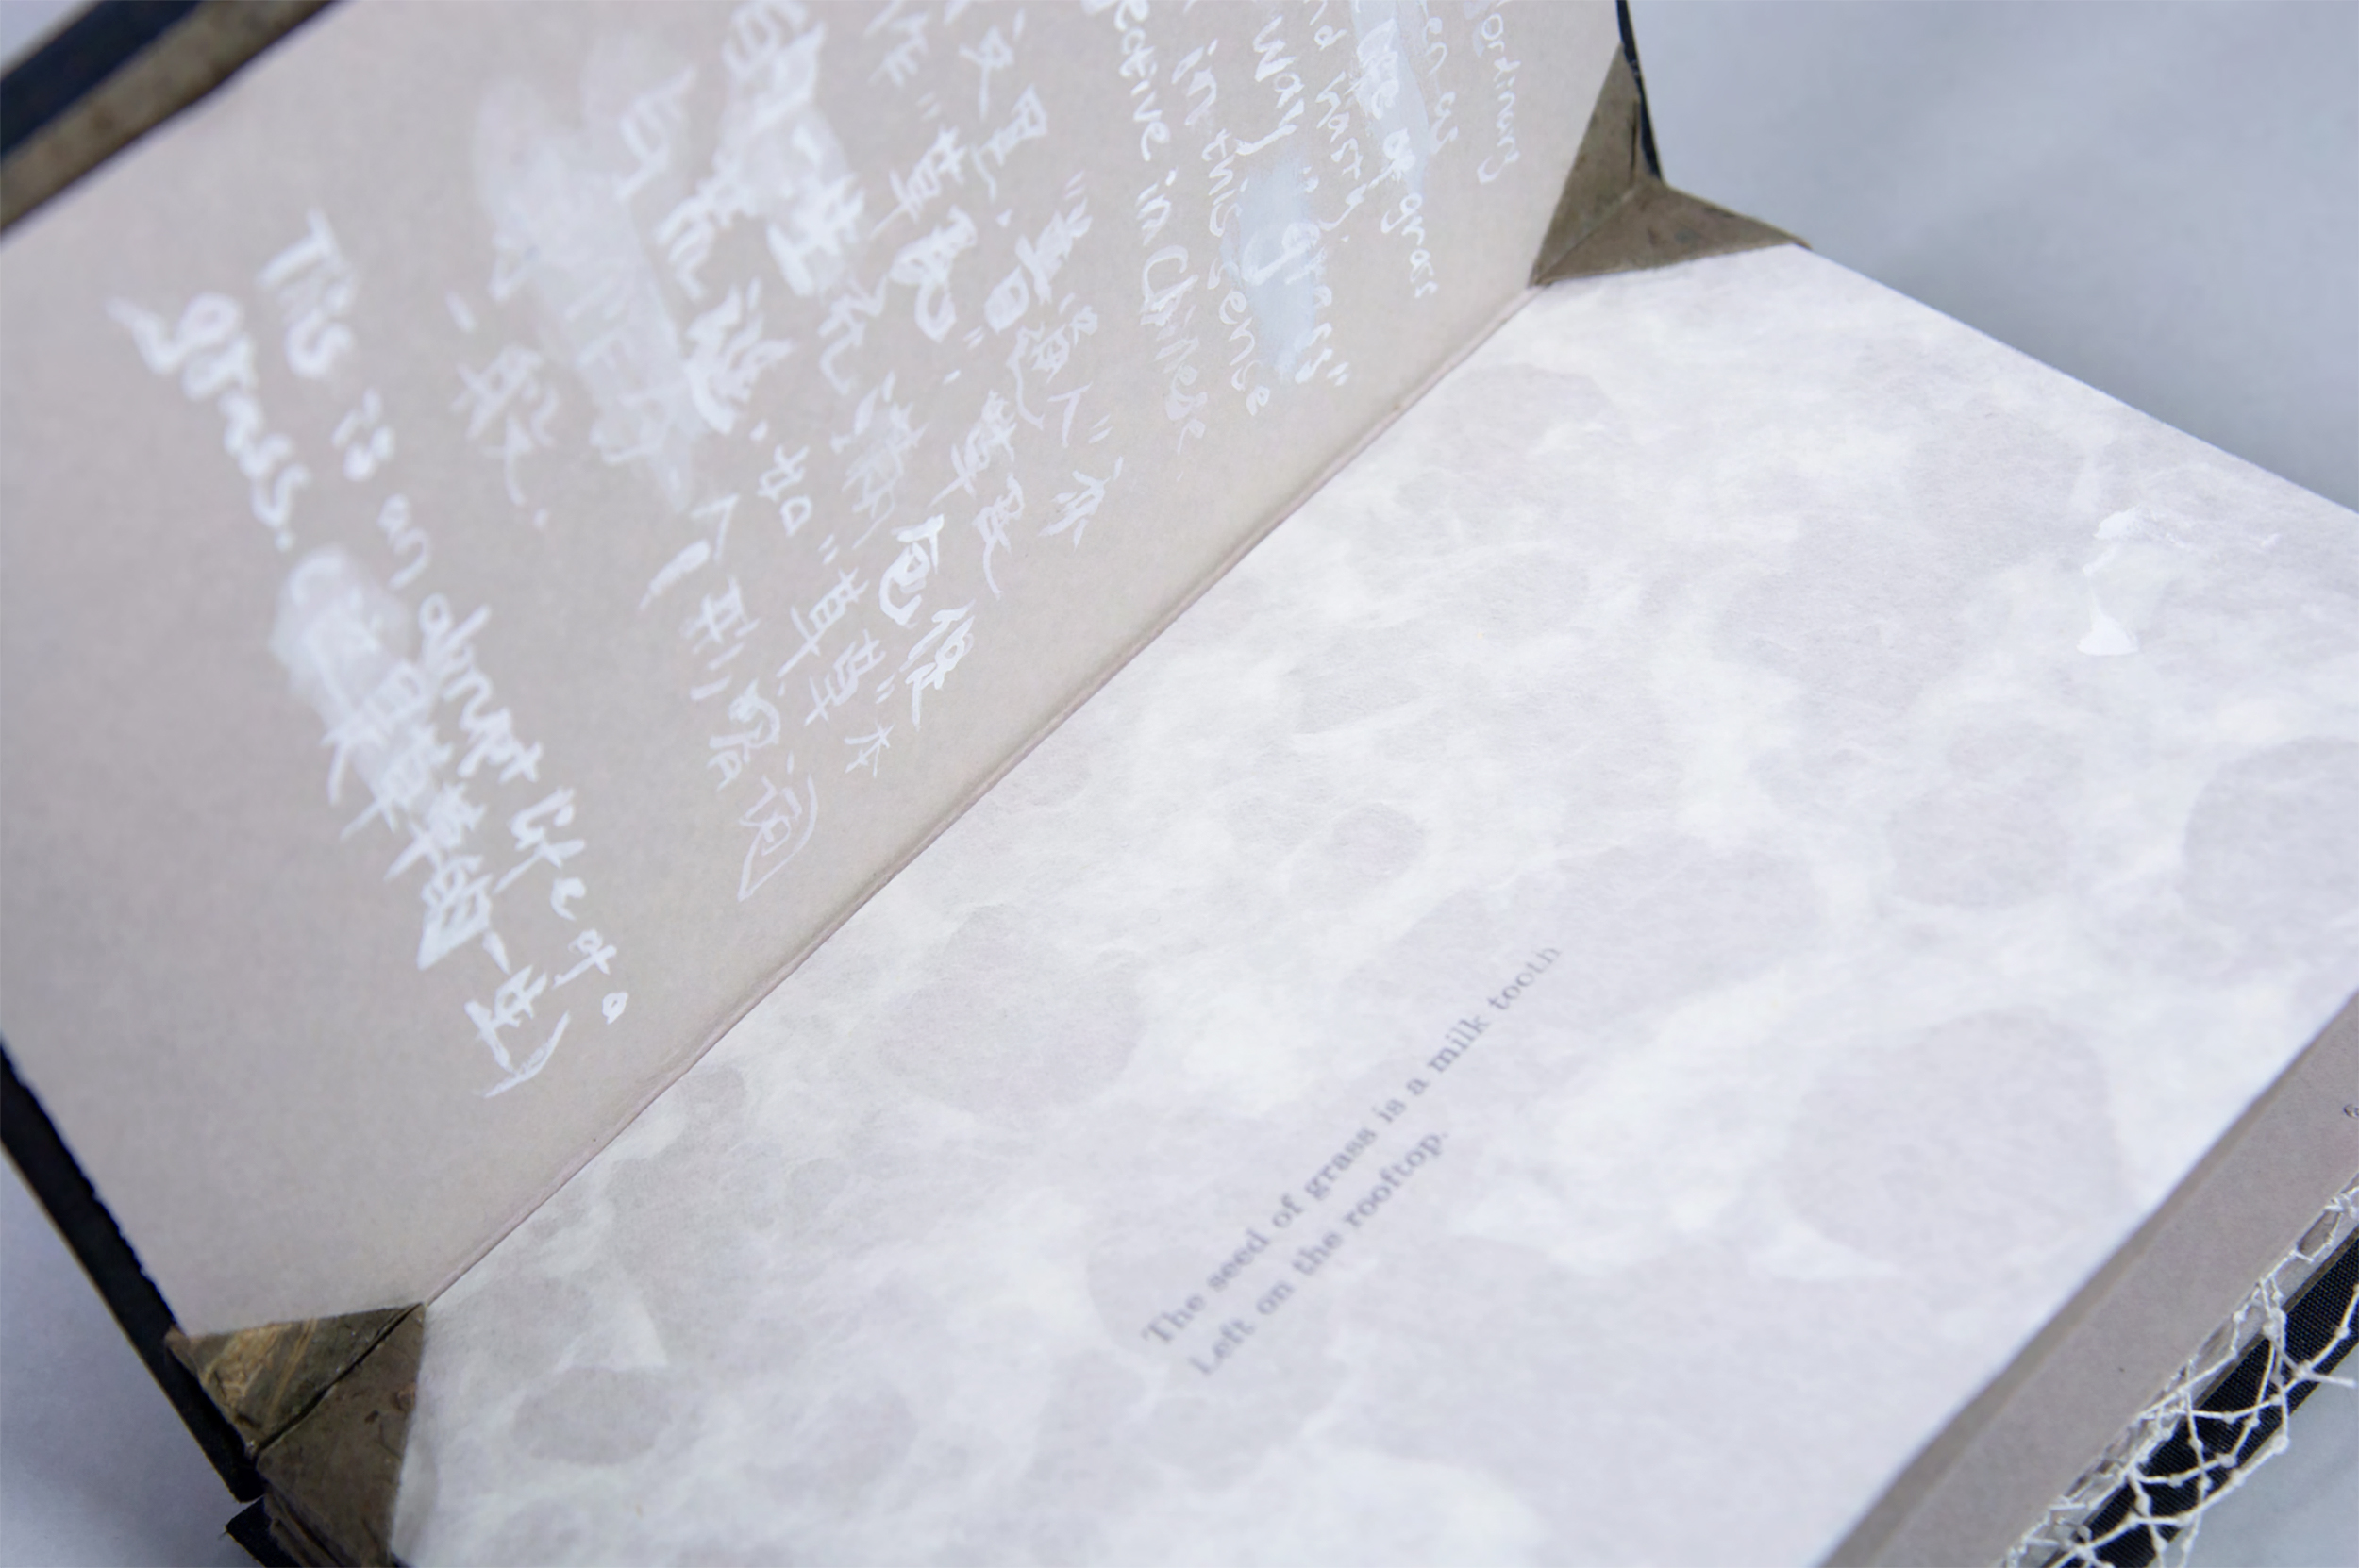 Chinese and English writing on embossed pages